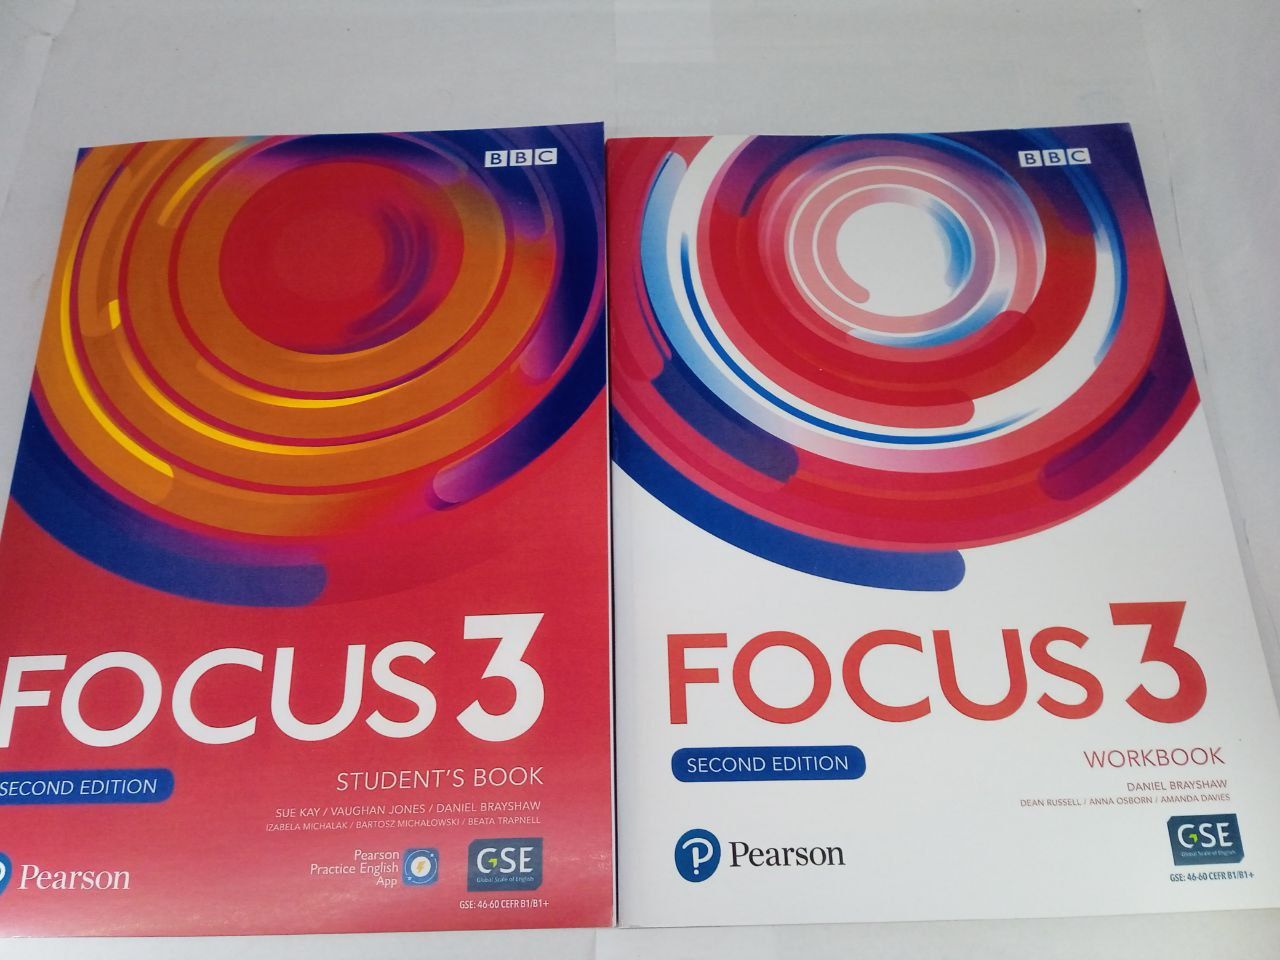 Focus 3 second edition students book workbook